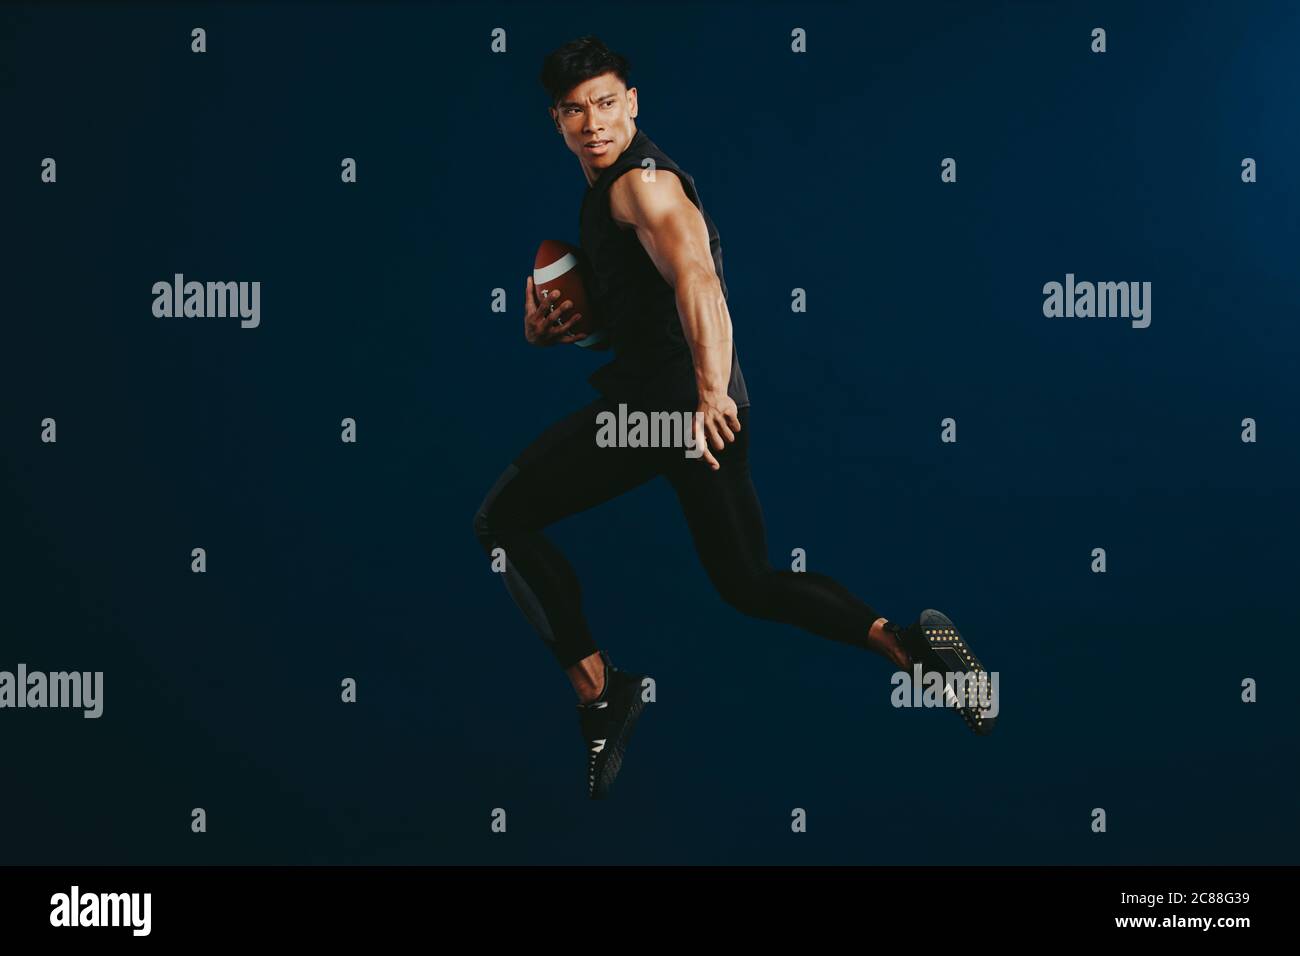 American footballer practicing tackle. Fit man in sportswear running with a football in hand. Stock Photo